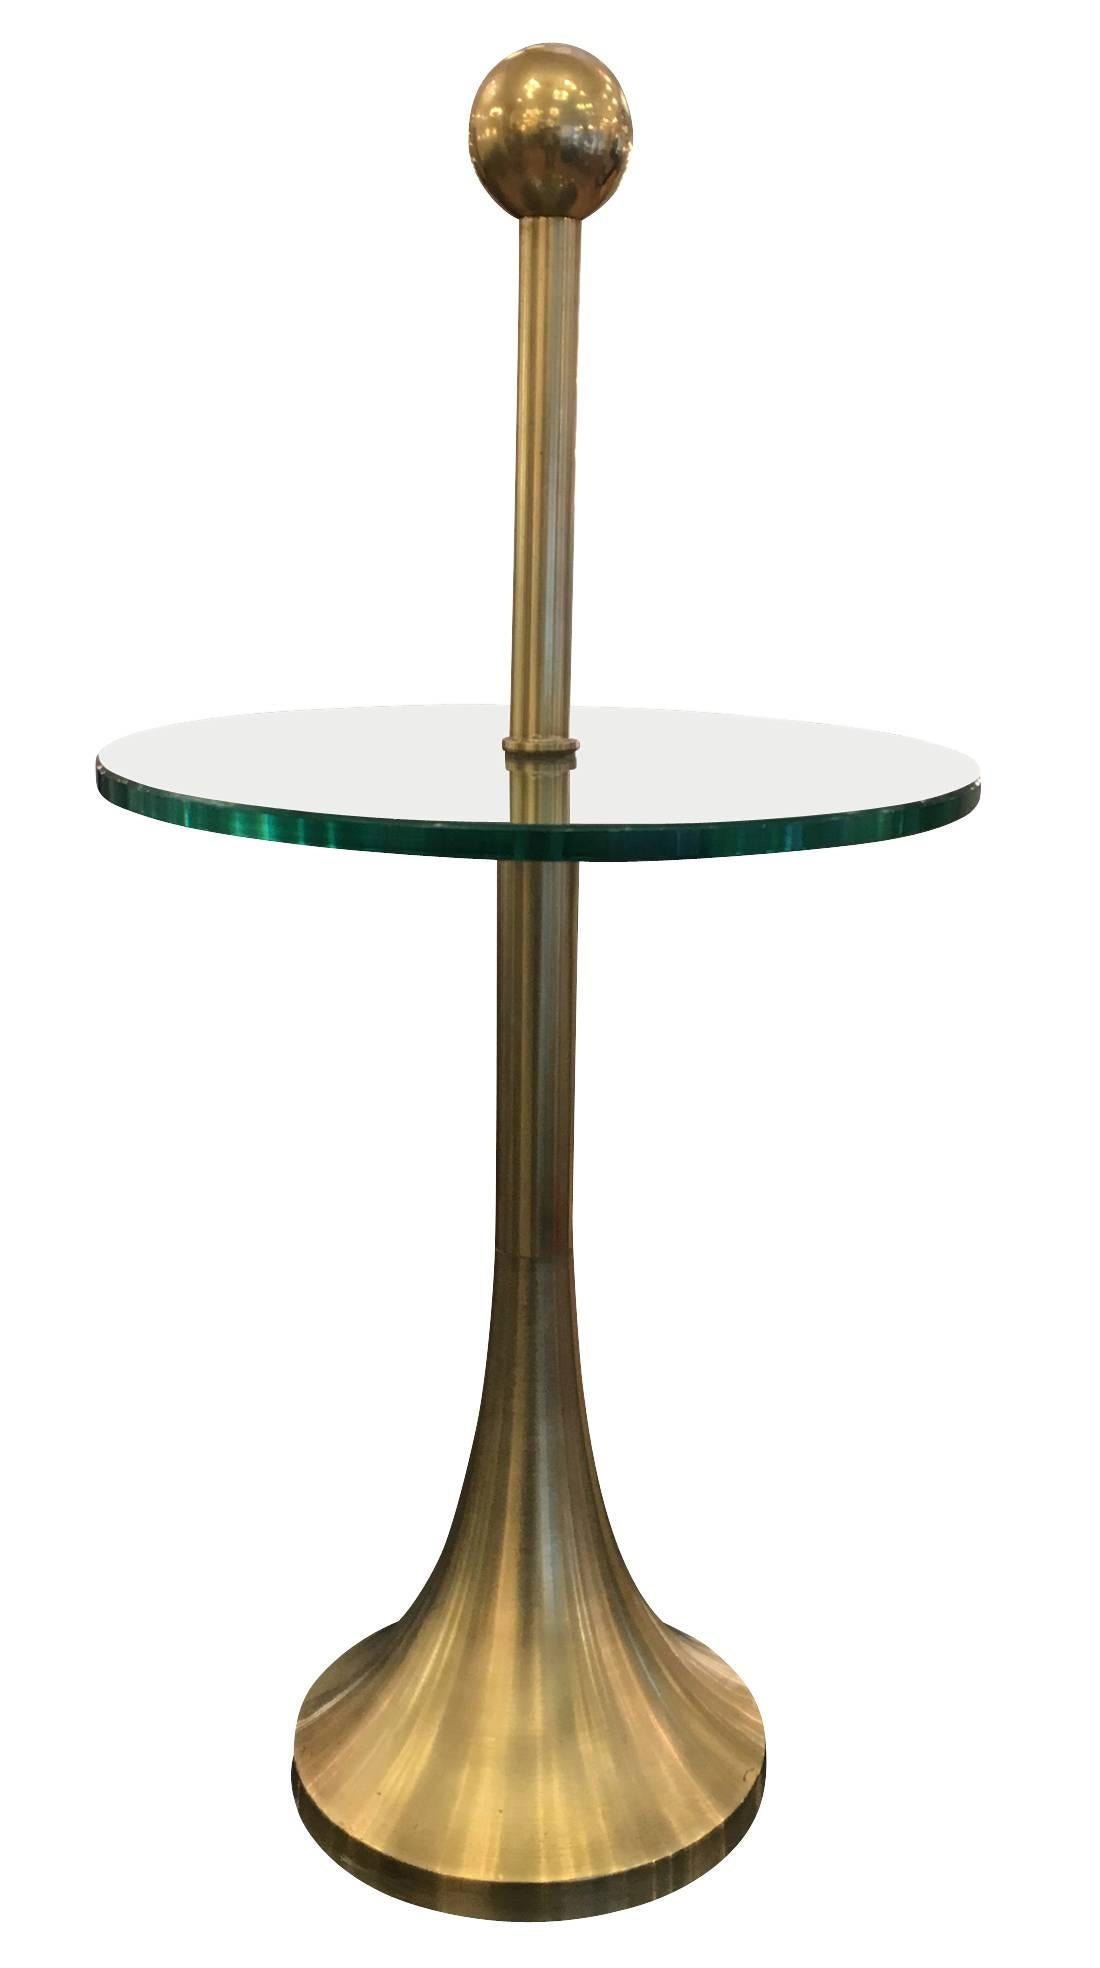 Curvy lines characterize this side table which was originally finished with a dark bronze patina. The trumpet shaped base ends with a sphere at the top. The thick glass at the center has straight edges. It can be polished upon request to bring out